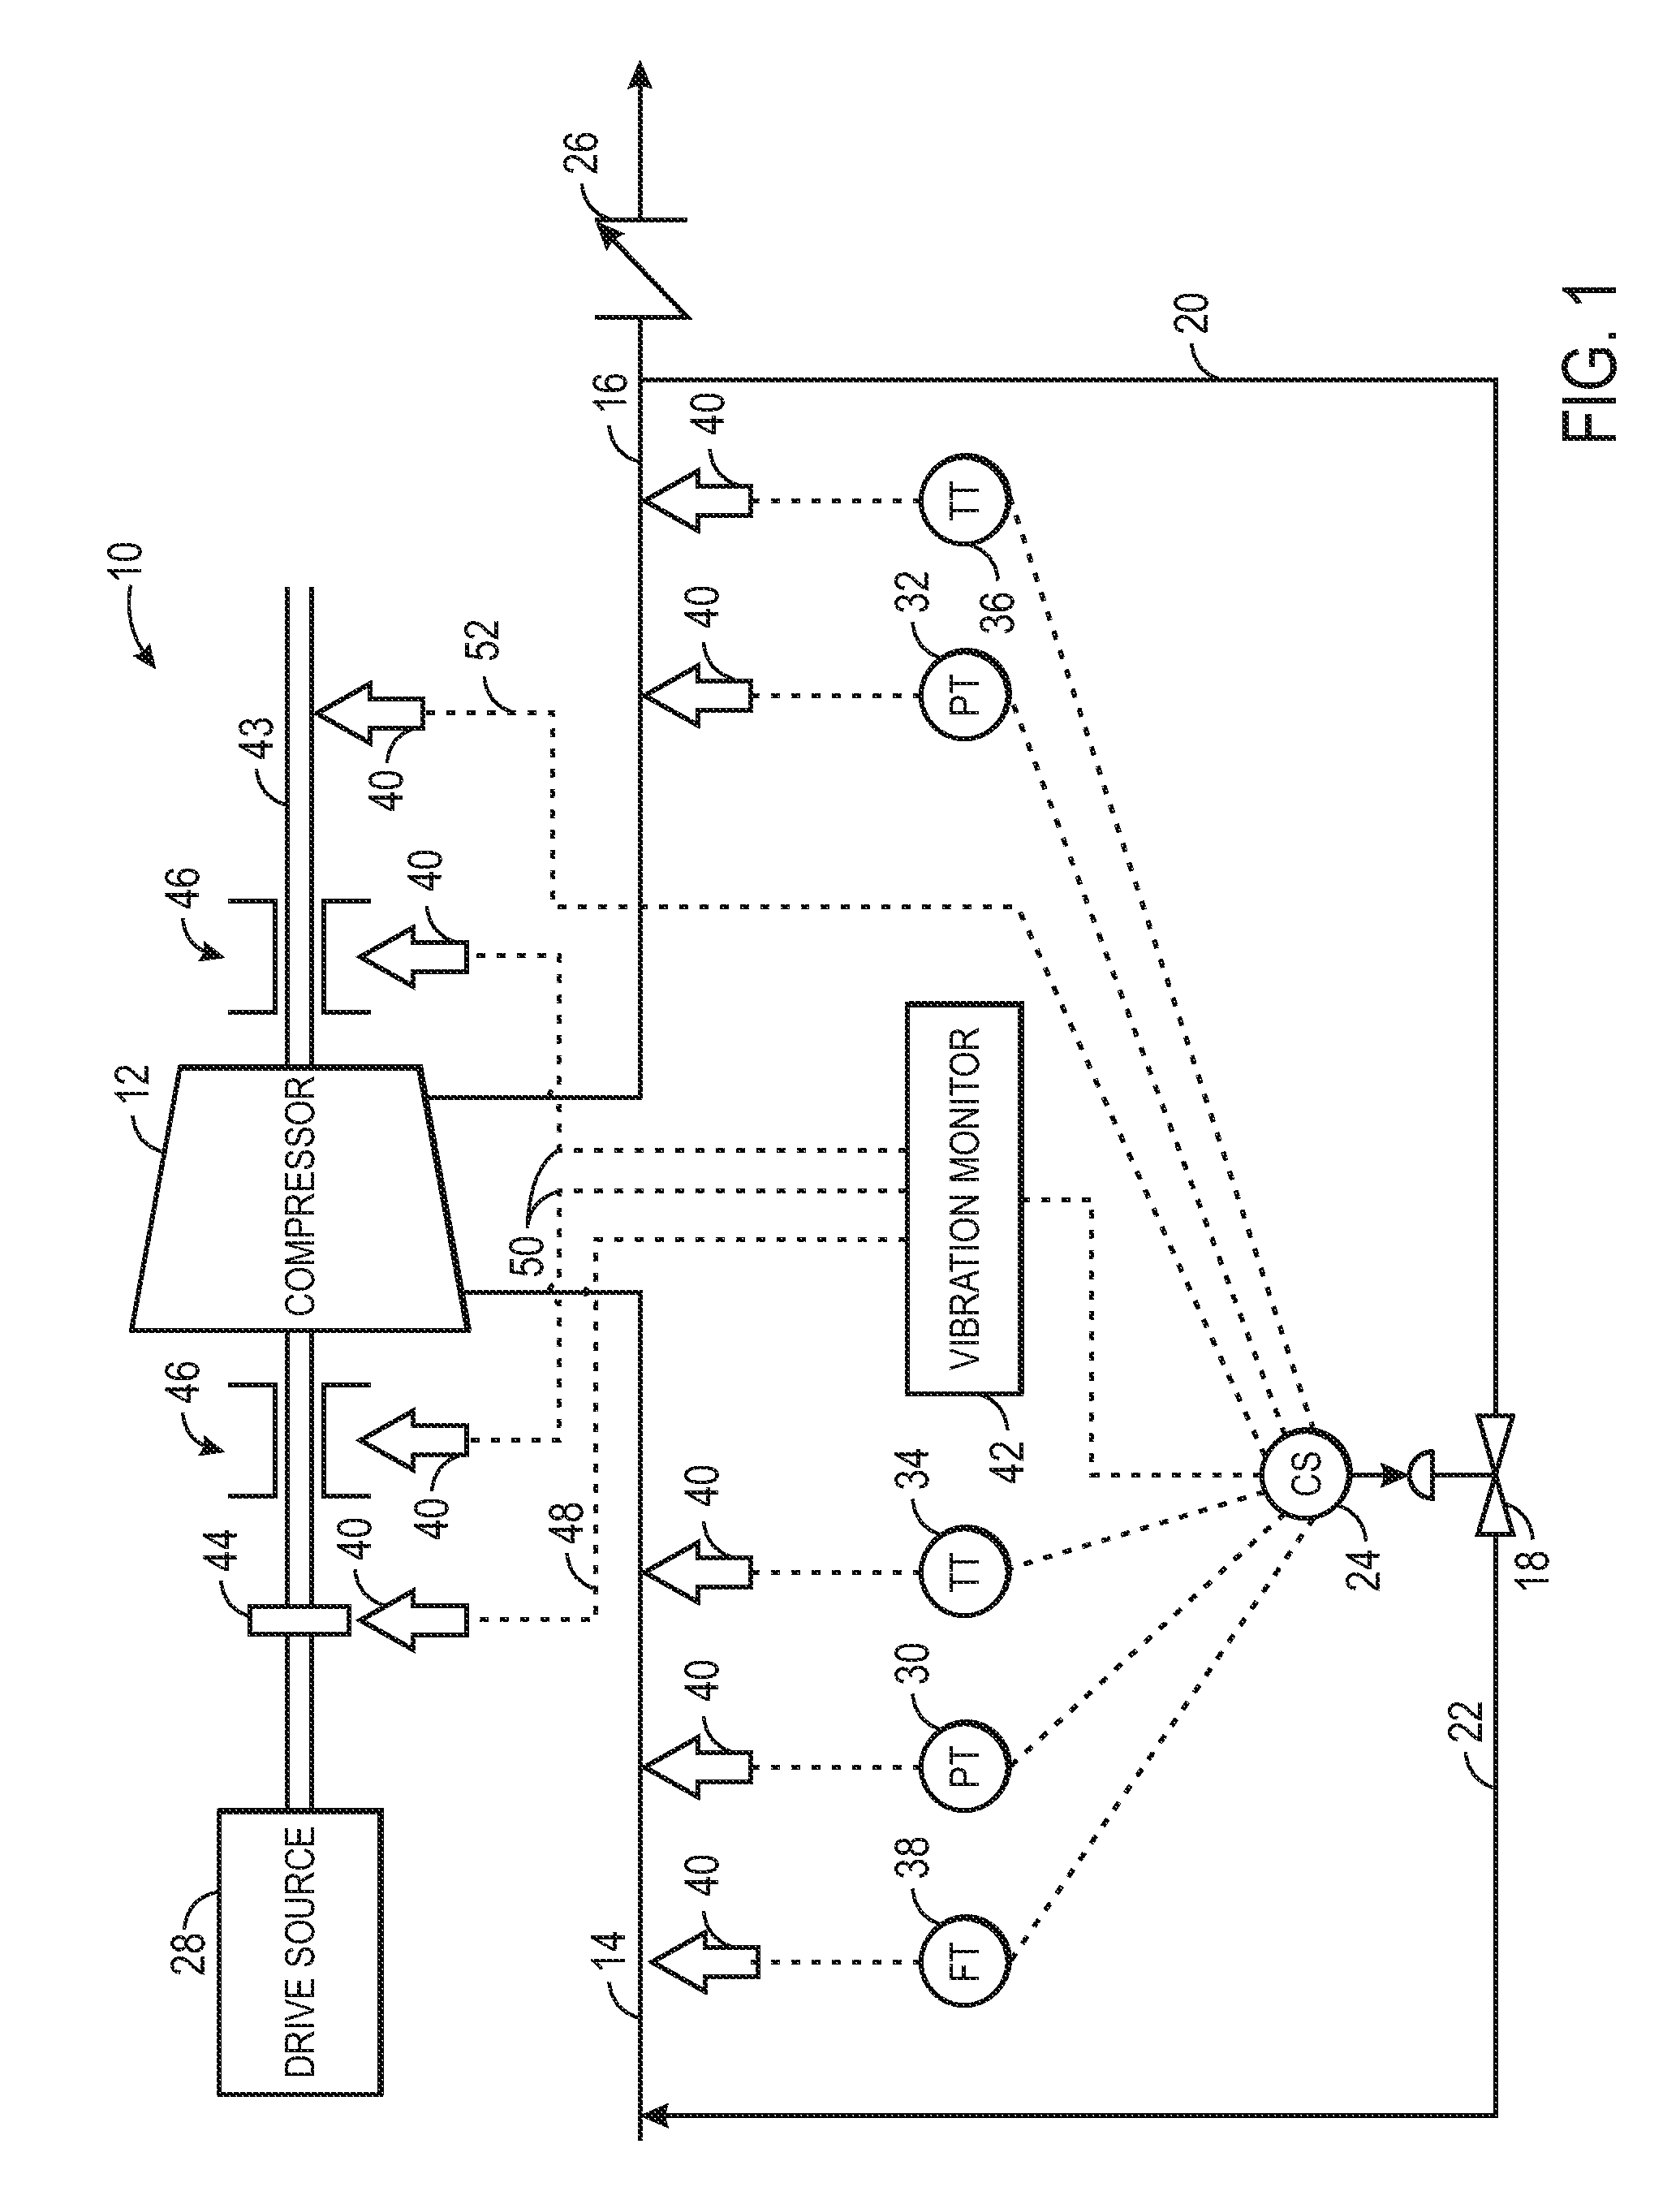 Stall and surge detection system and method